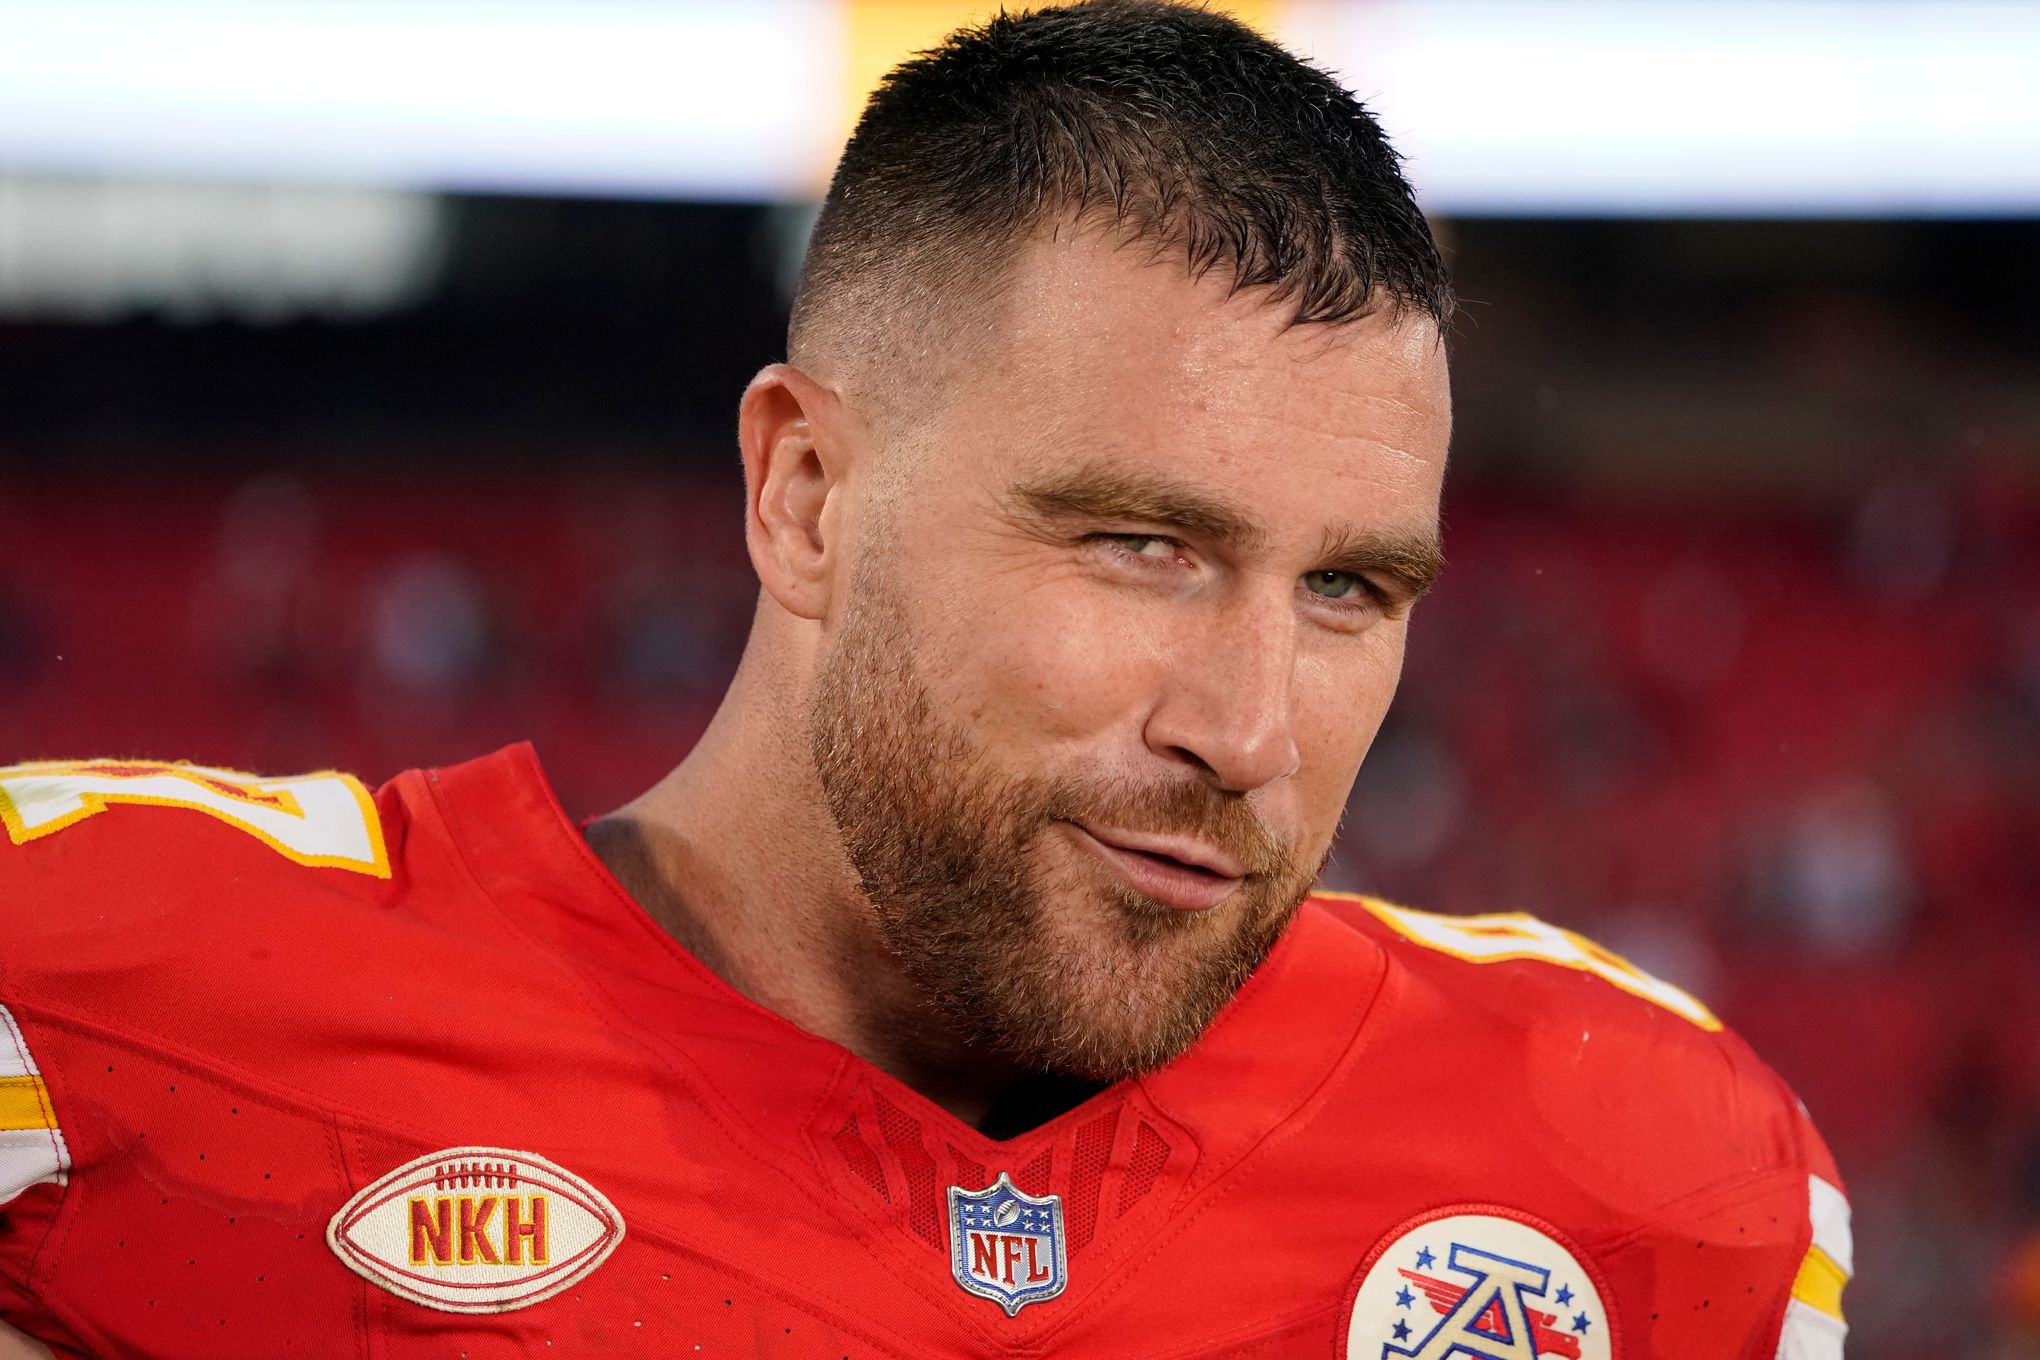 Travis Kelce repeats as the top tight end in the AP's NFL Top 5